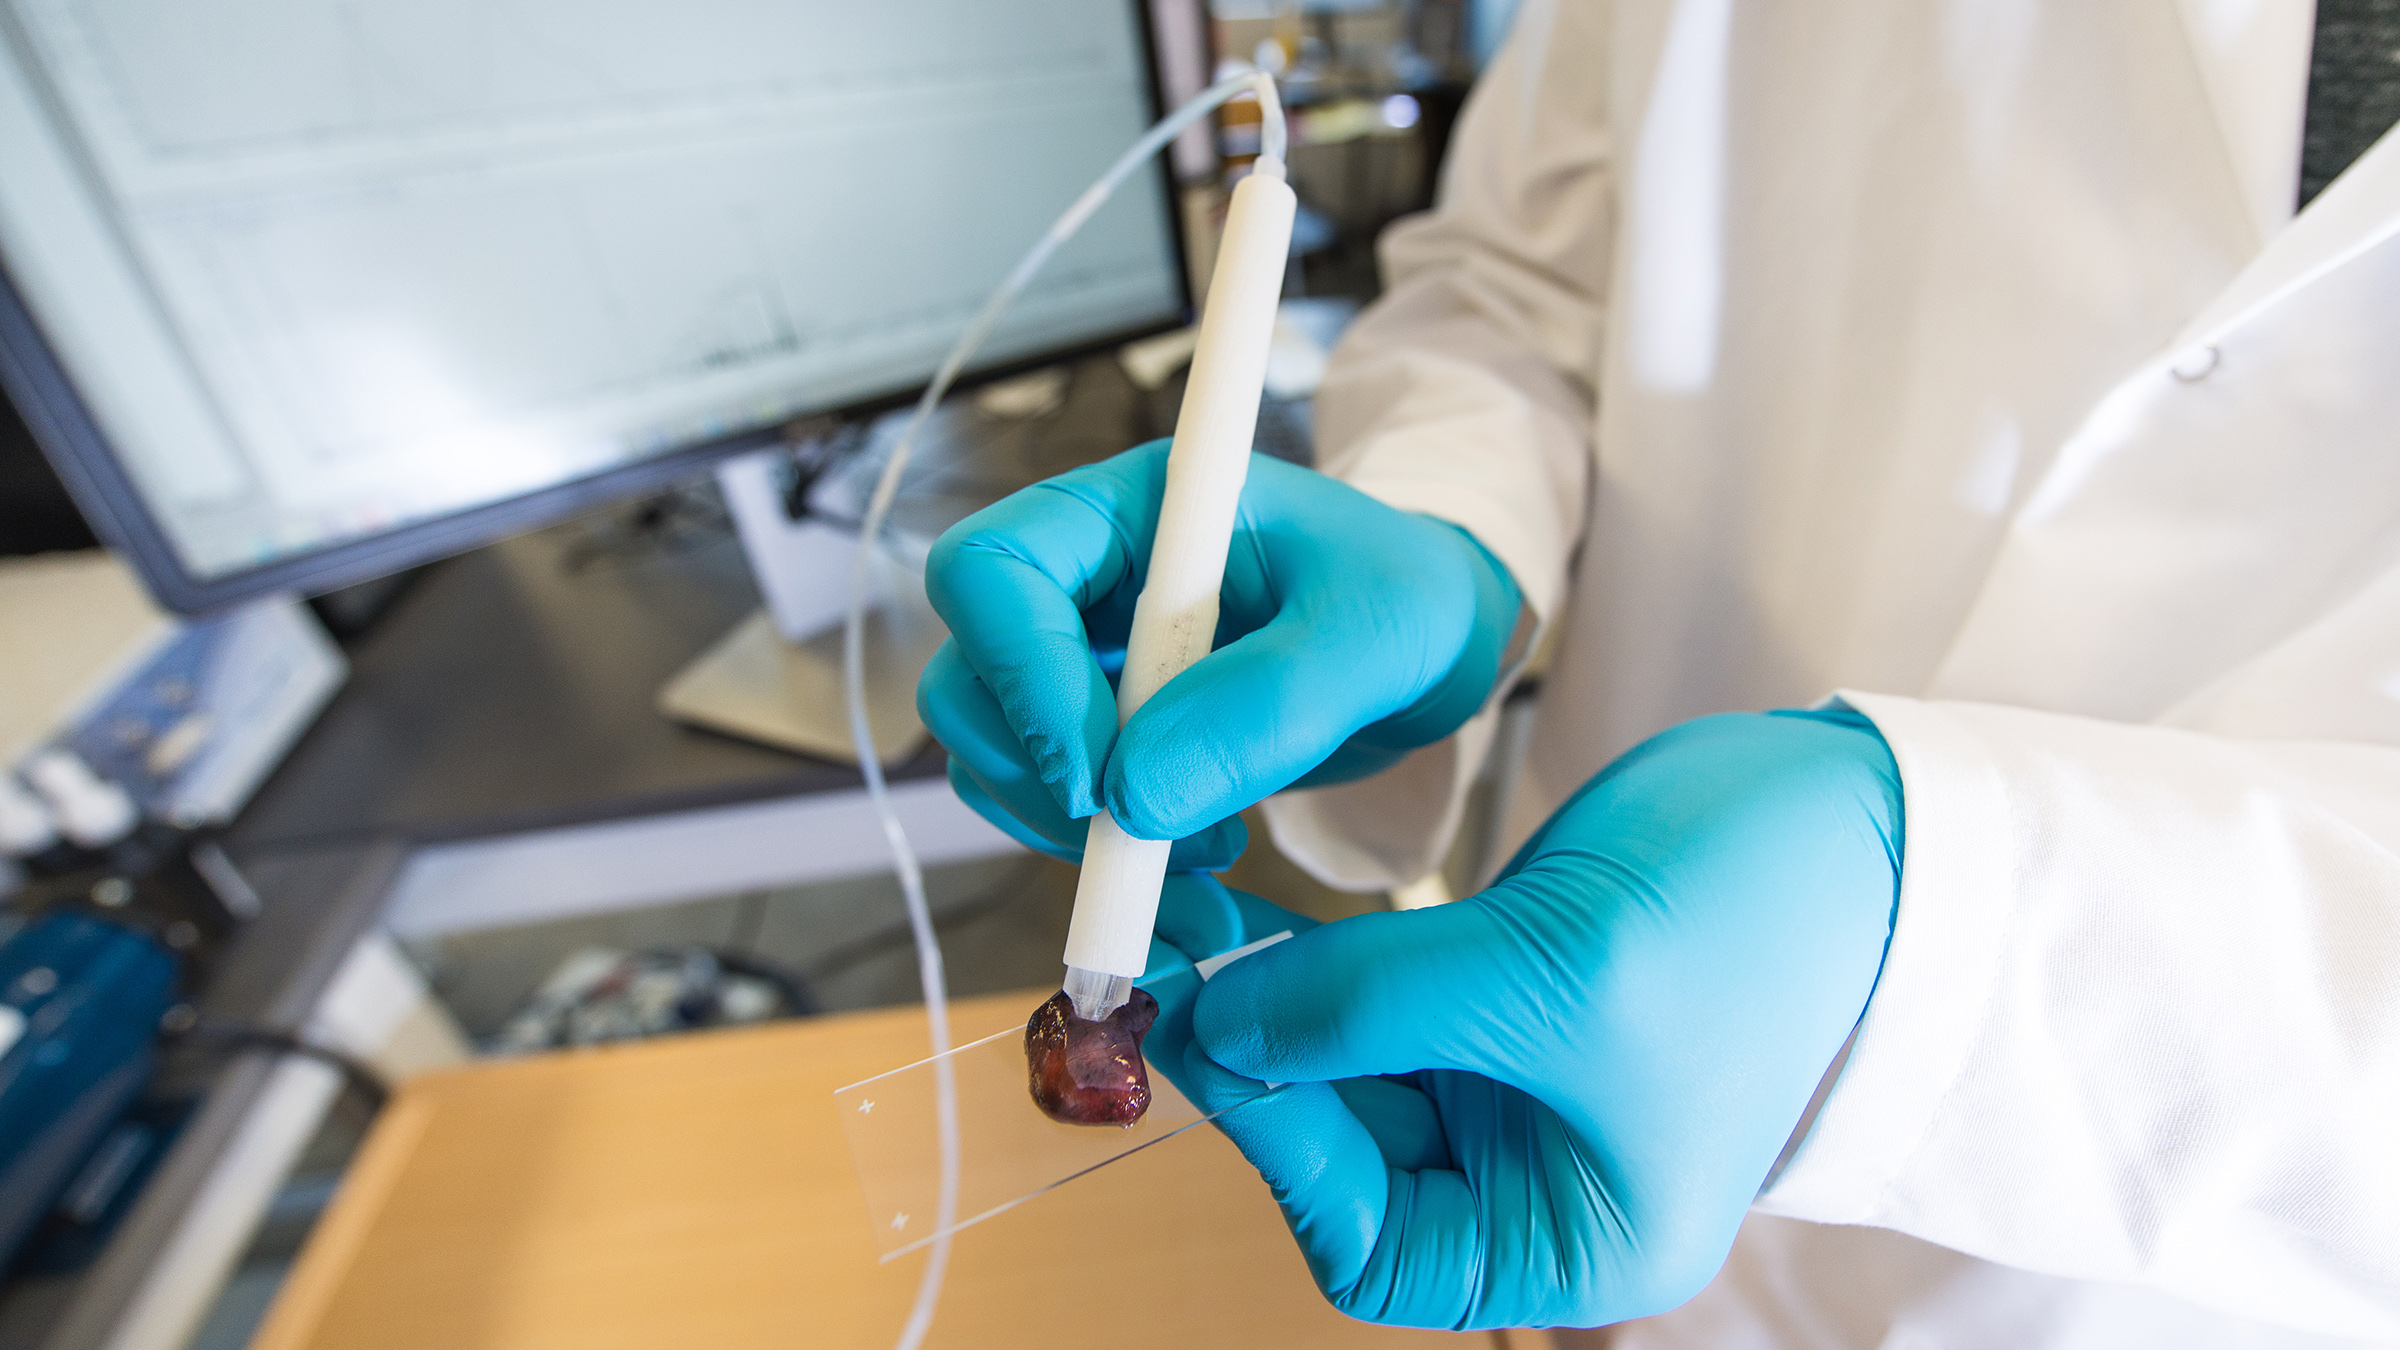 Scientist in white labcoat and blue gloves touches a pen-like device to a red tissue sample